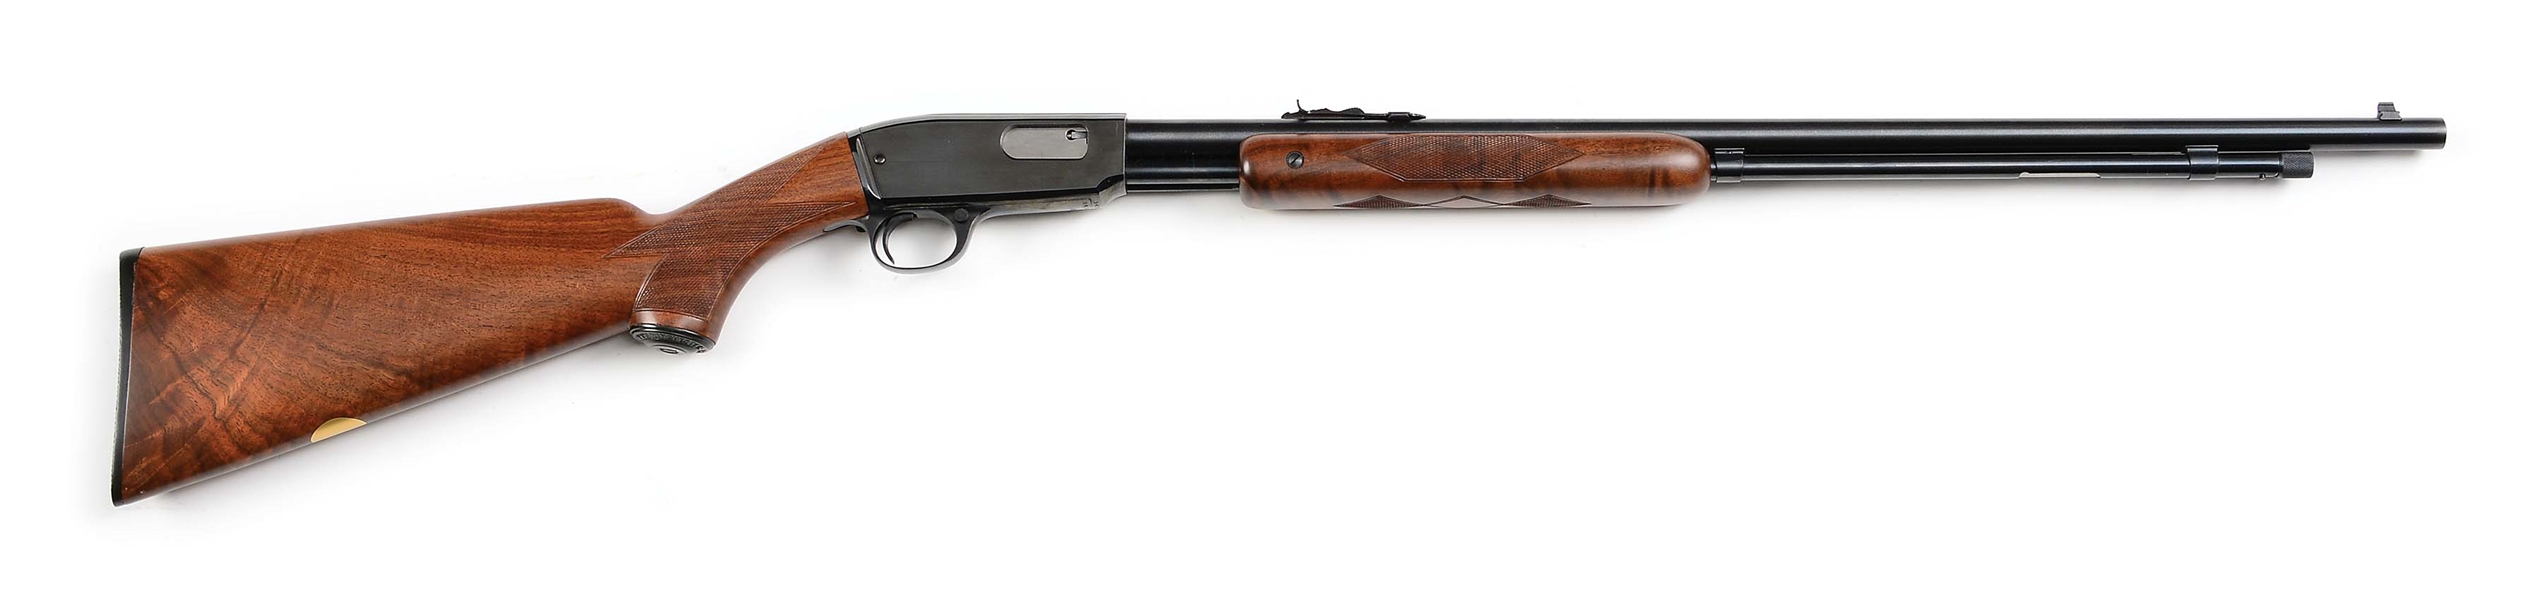 (C) DELUXE WINCHESTER MODEL 61 .22 MAGNUM SLIDE ACTION RIFLE (1962).